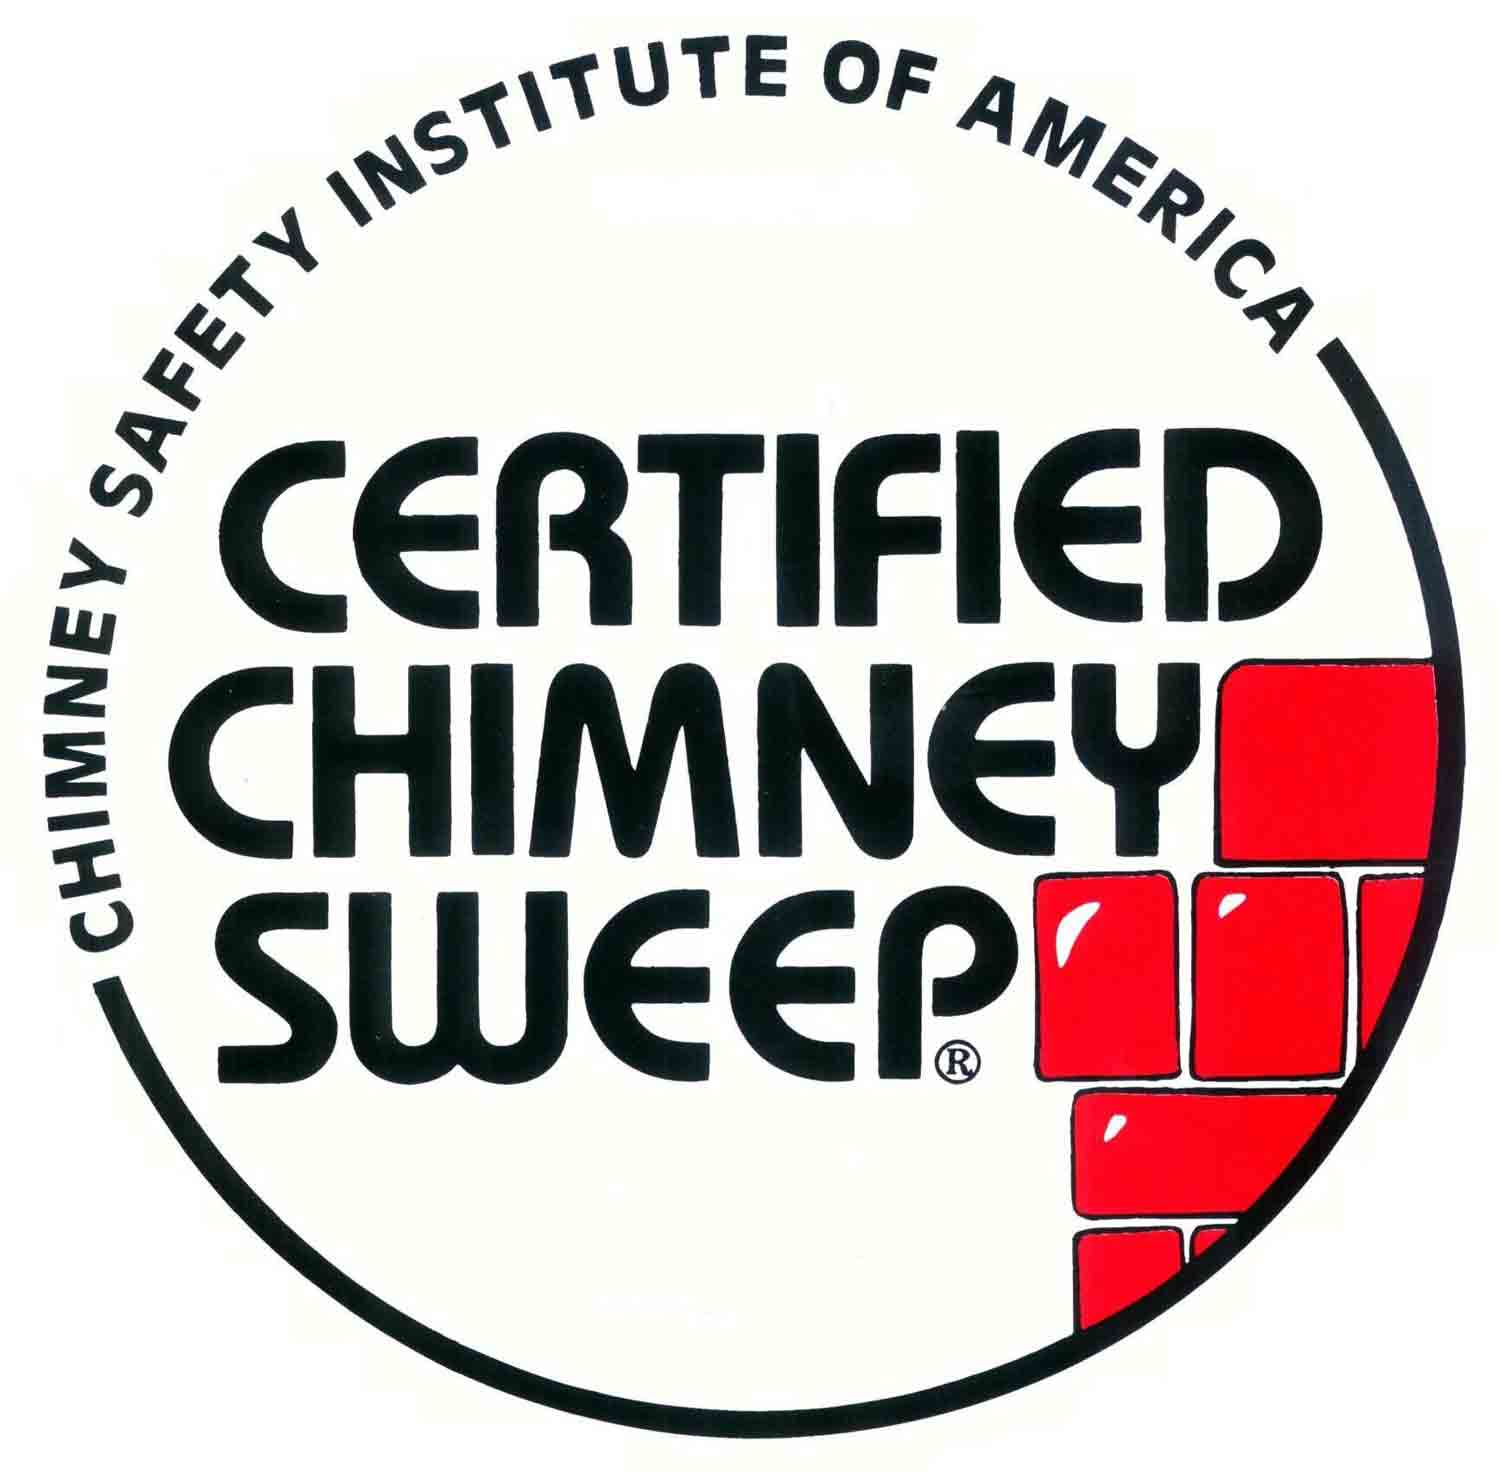 Chimney Safety Institute of America (Certified Chimney Sweep)